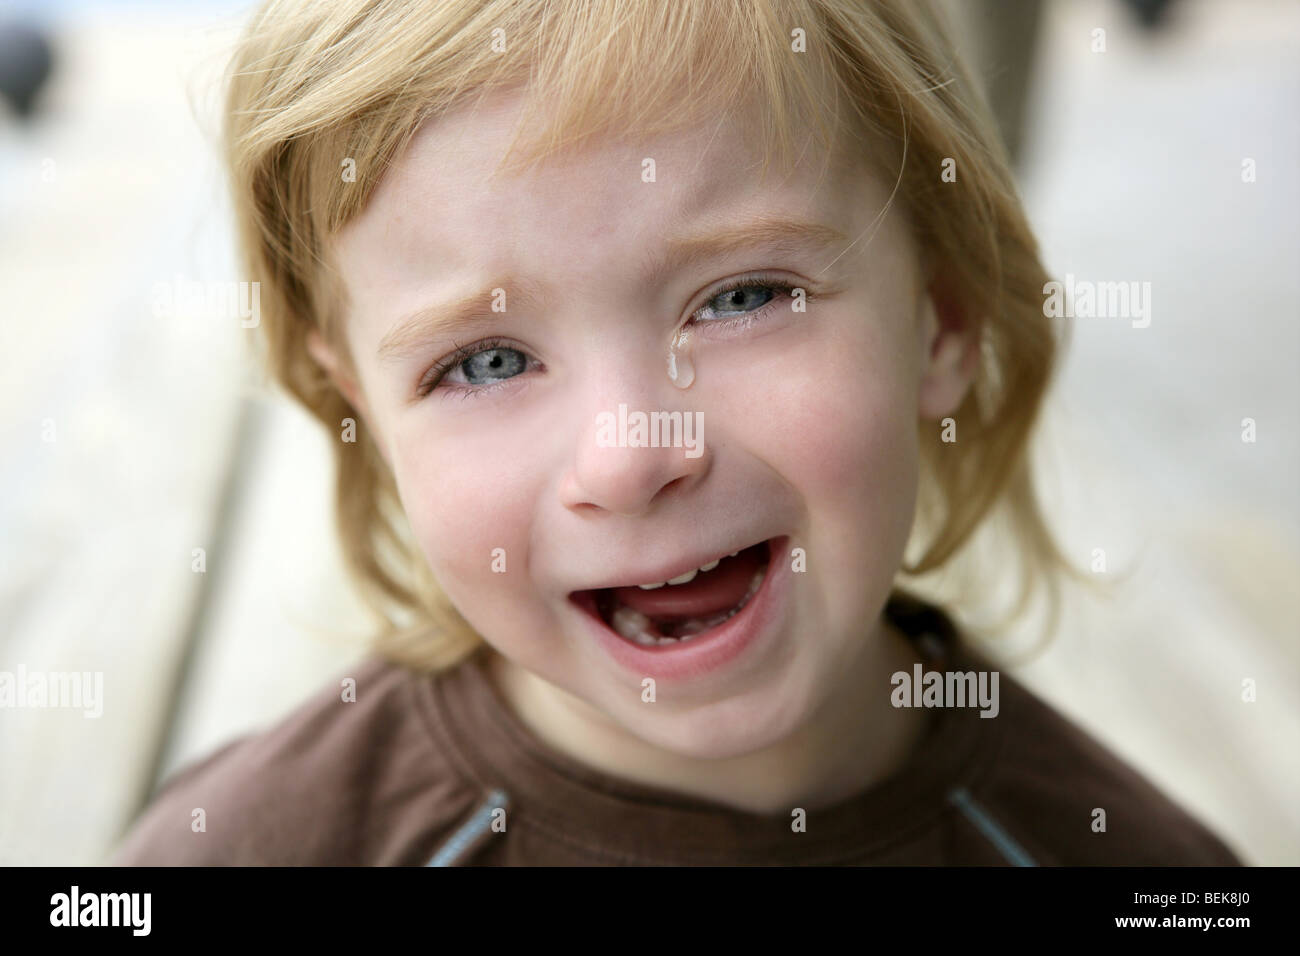 Adorable blond little girl crying closeup portrait Stock Photo